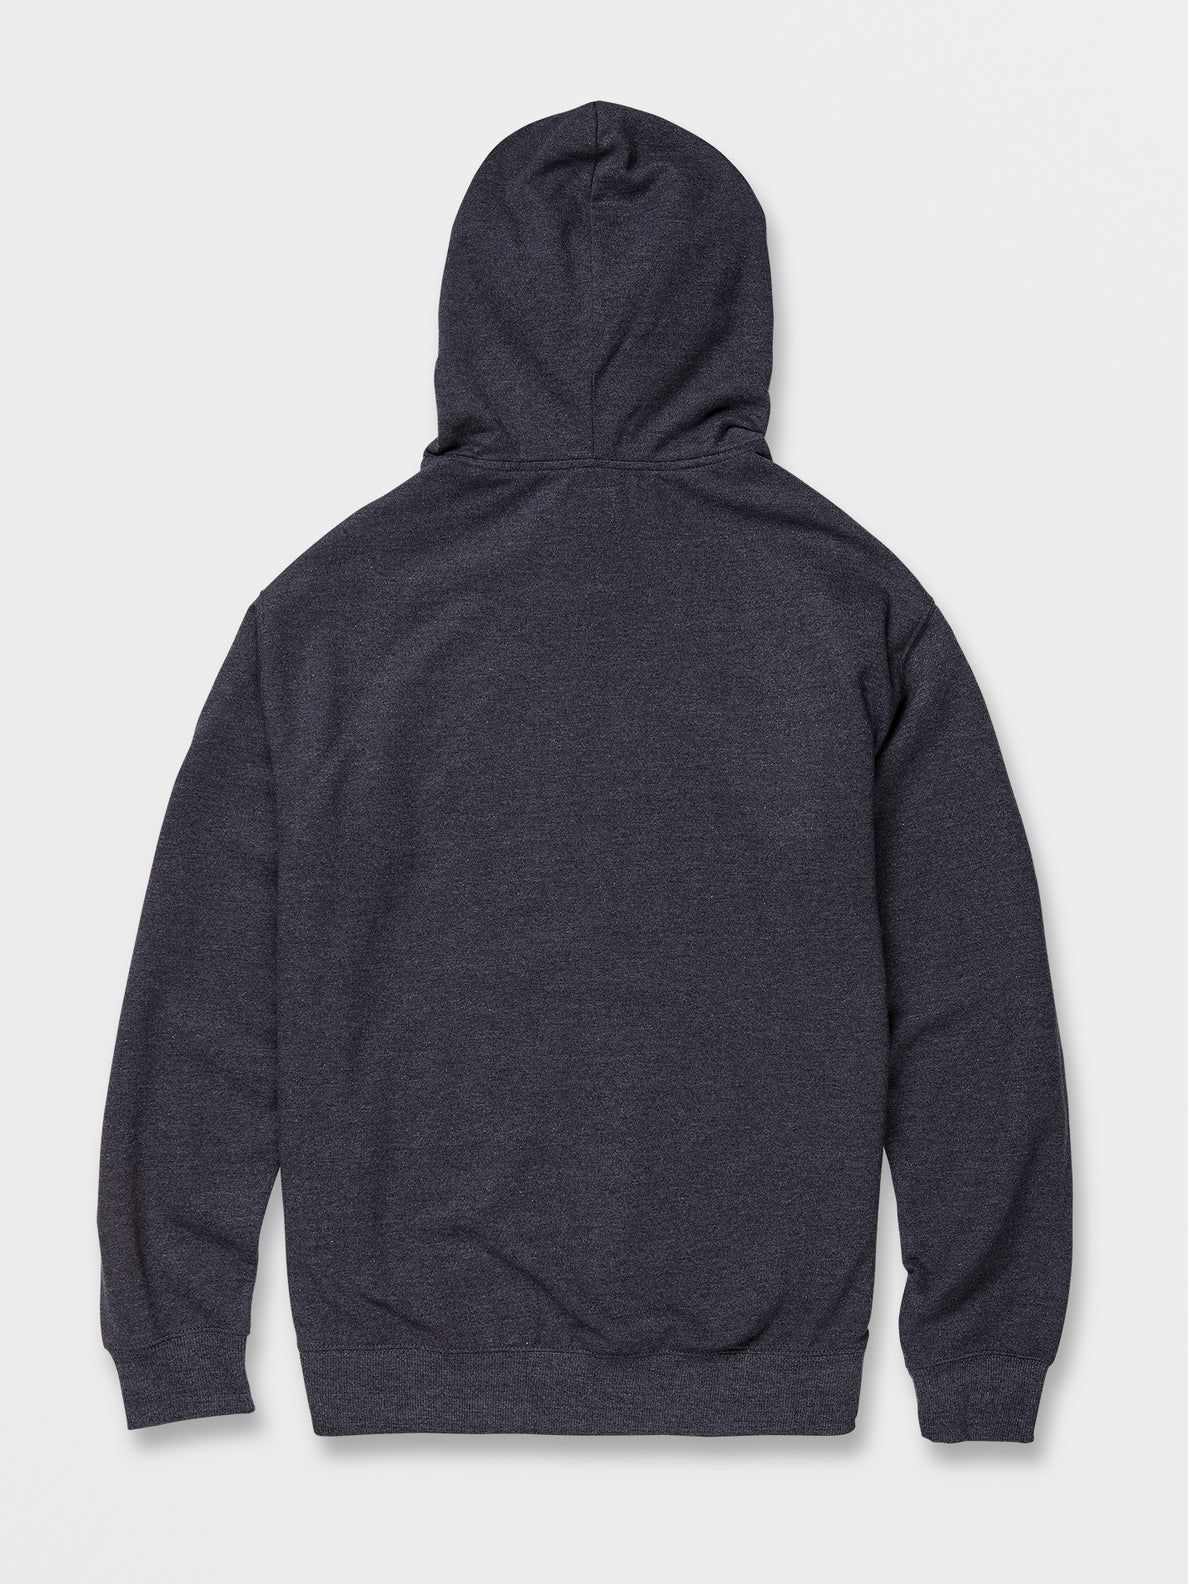 Black Friday Pullover Hoodie - Navy Heather (A4142203_NVH) [B]